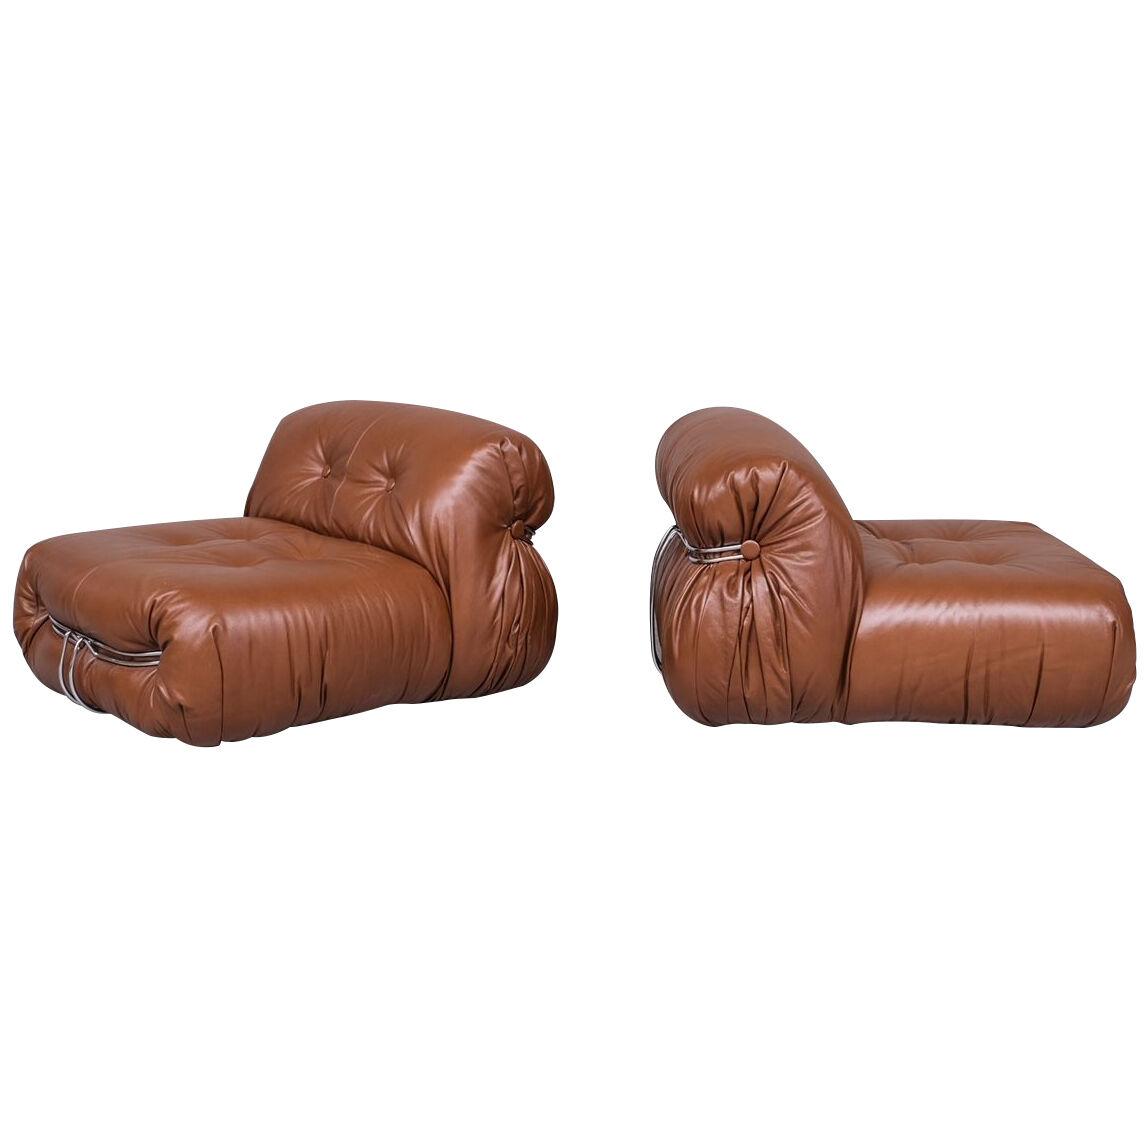 Pair of Leather Soriana Lounge Chairs by Scarpa for Cassina